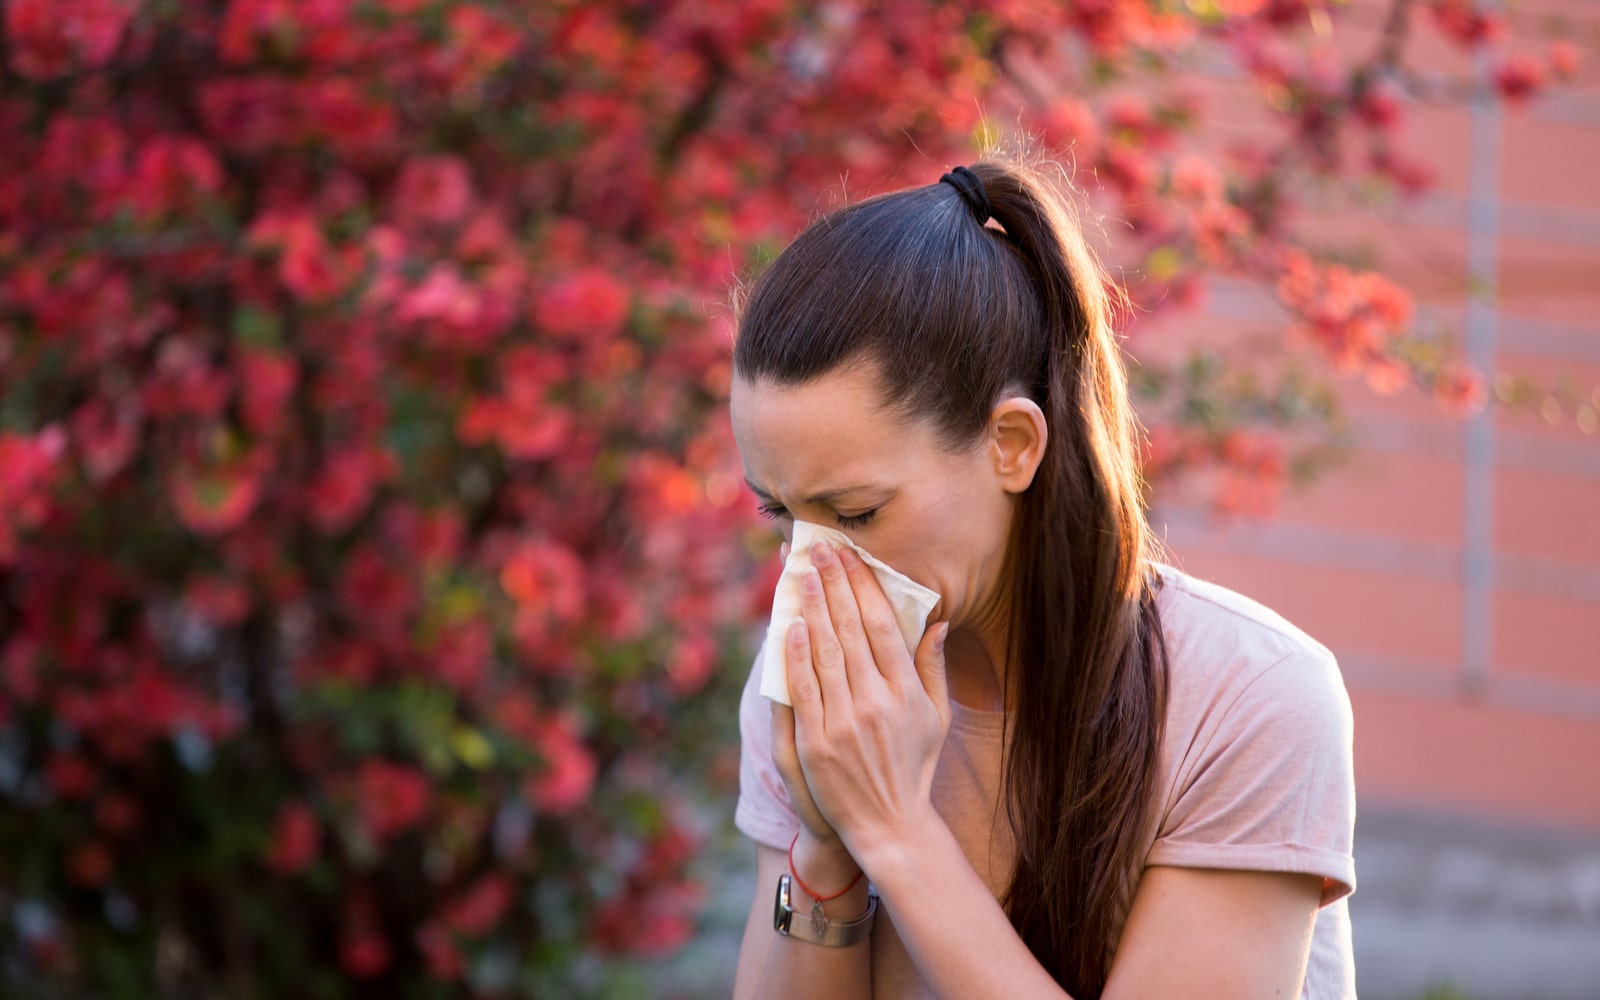 Woman suffering from allergies